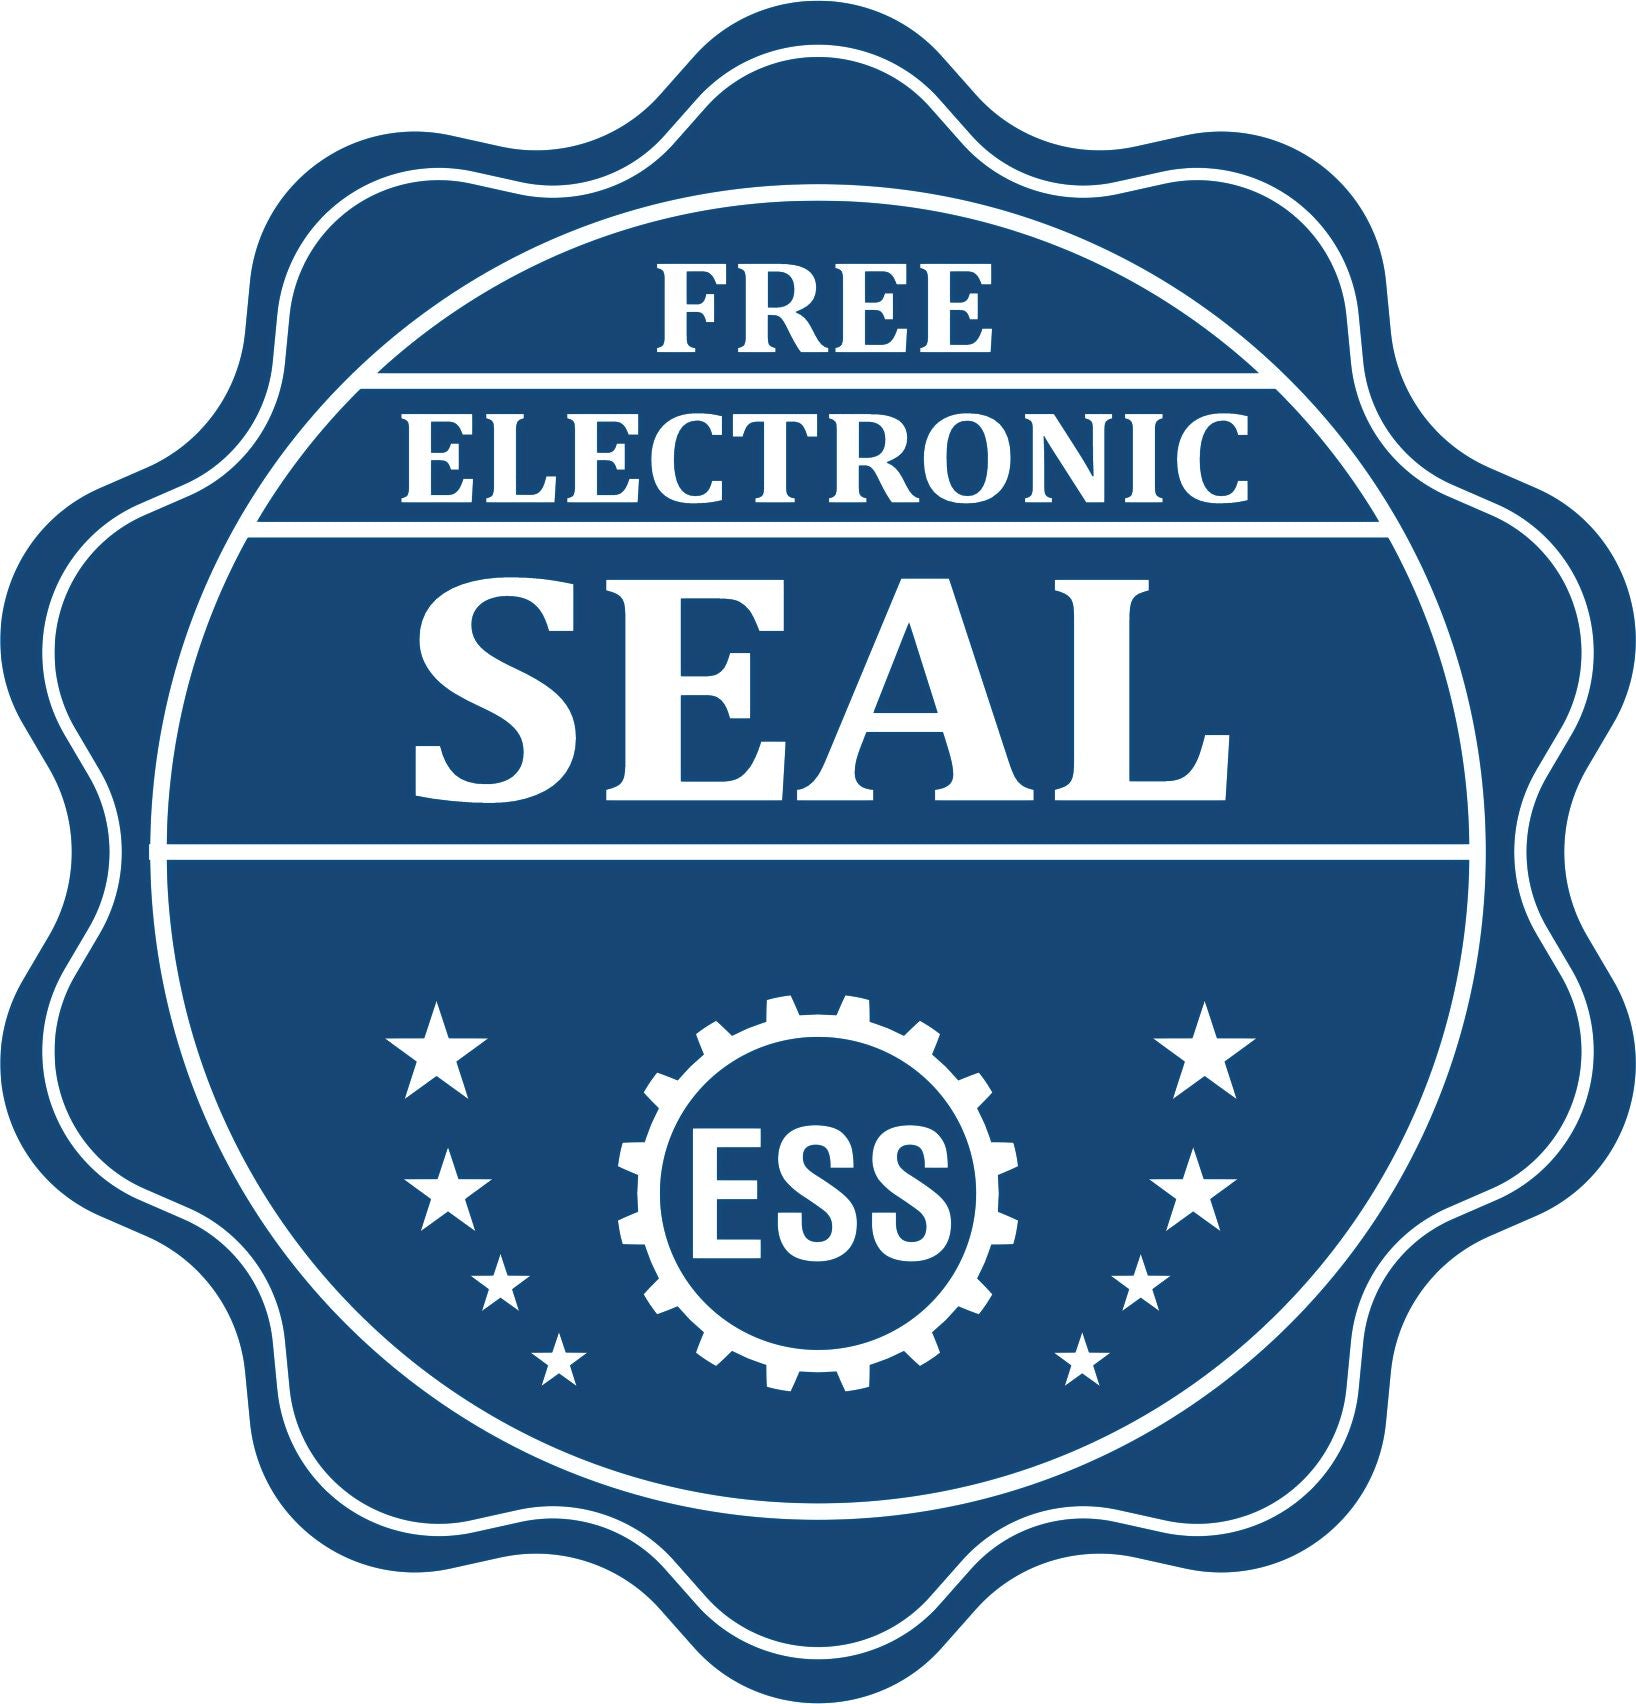 A badge showing a free electronic seal for the Soft Puerto Rico Professional Engineer Seal with stars and the ESS gear on the emblem.